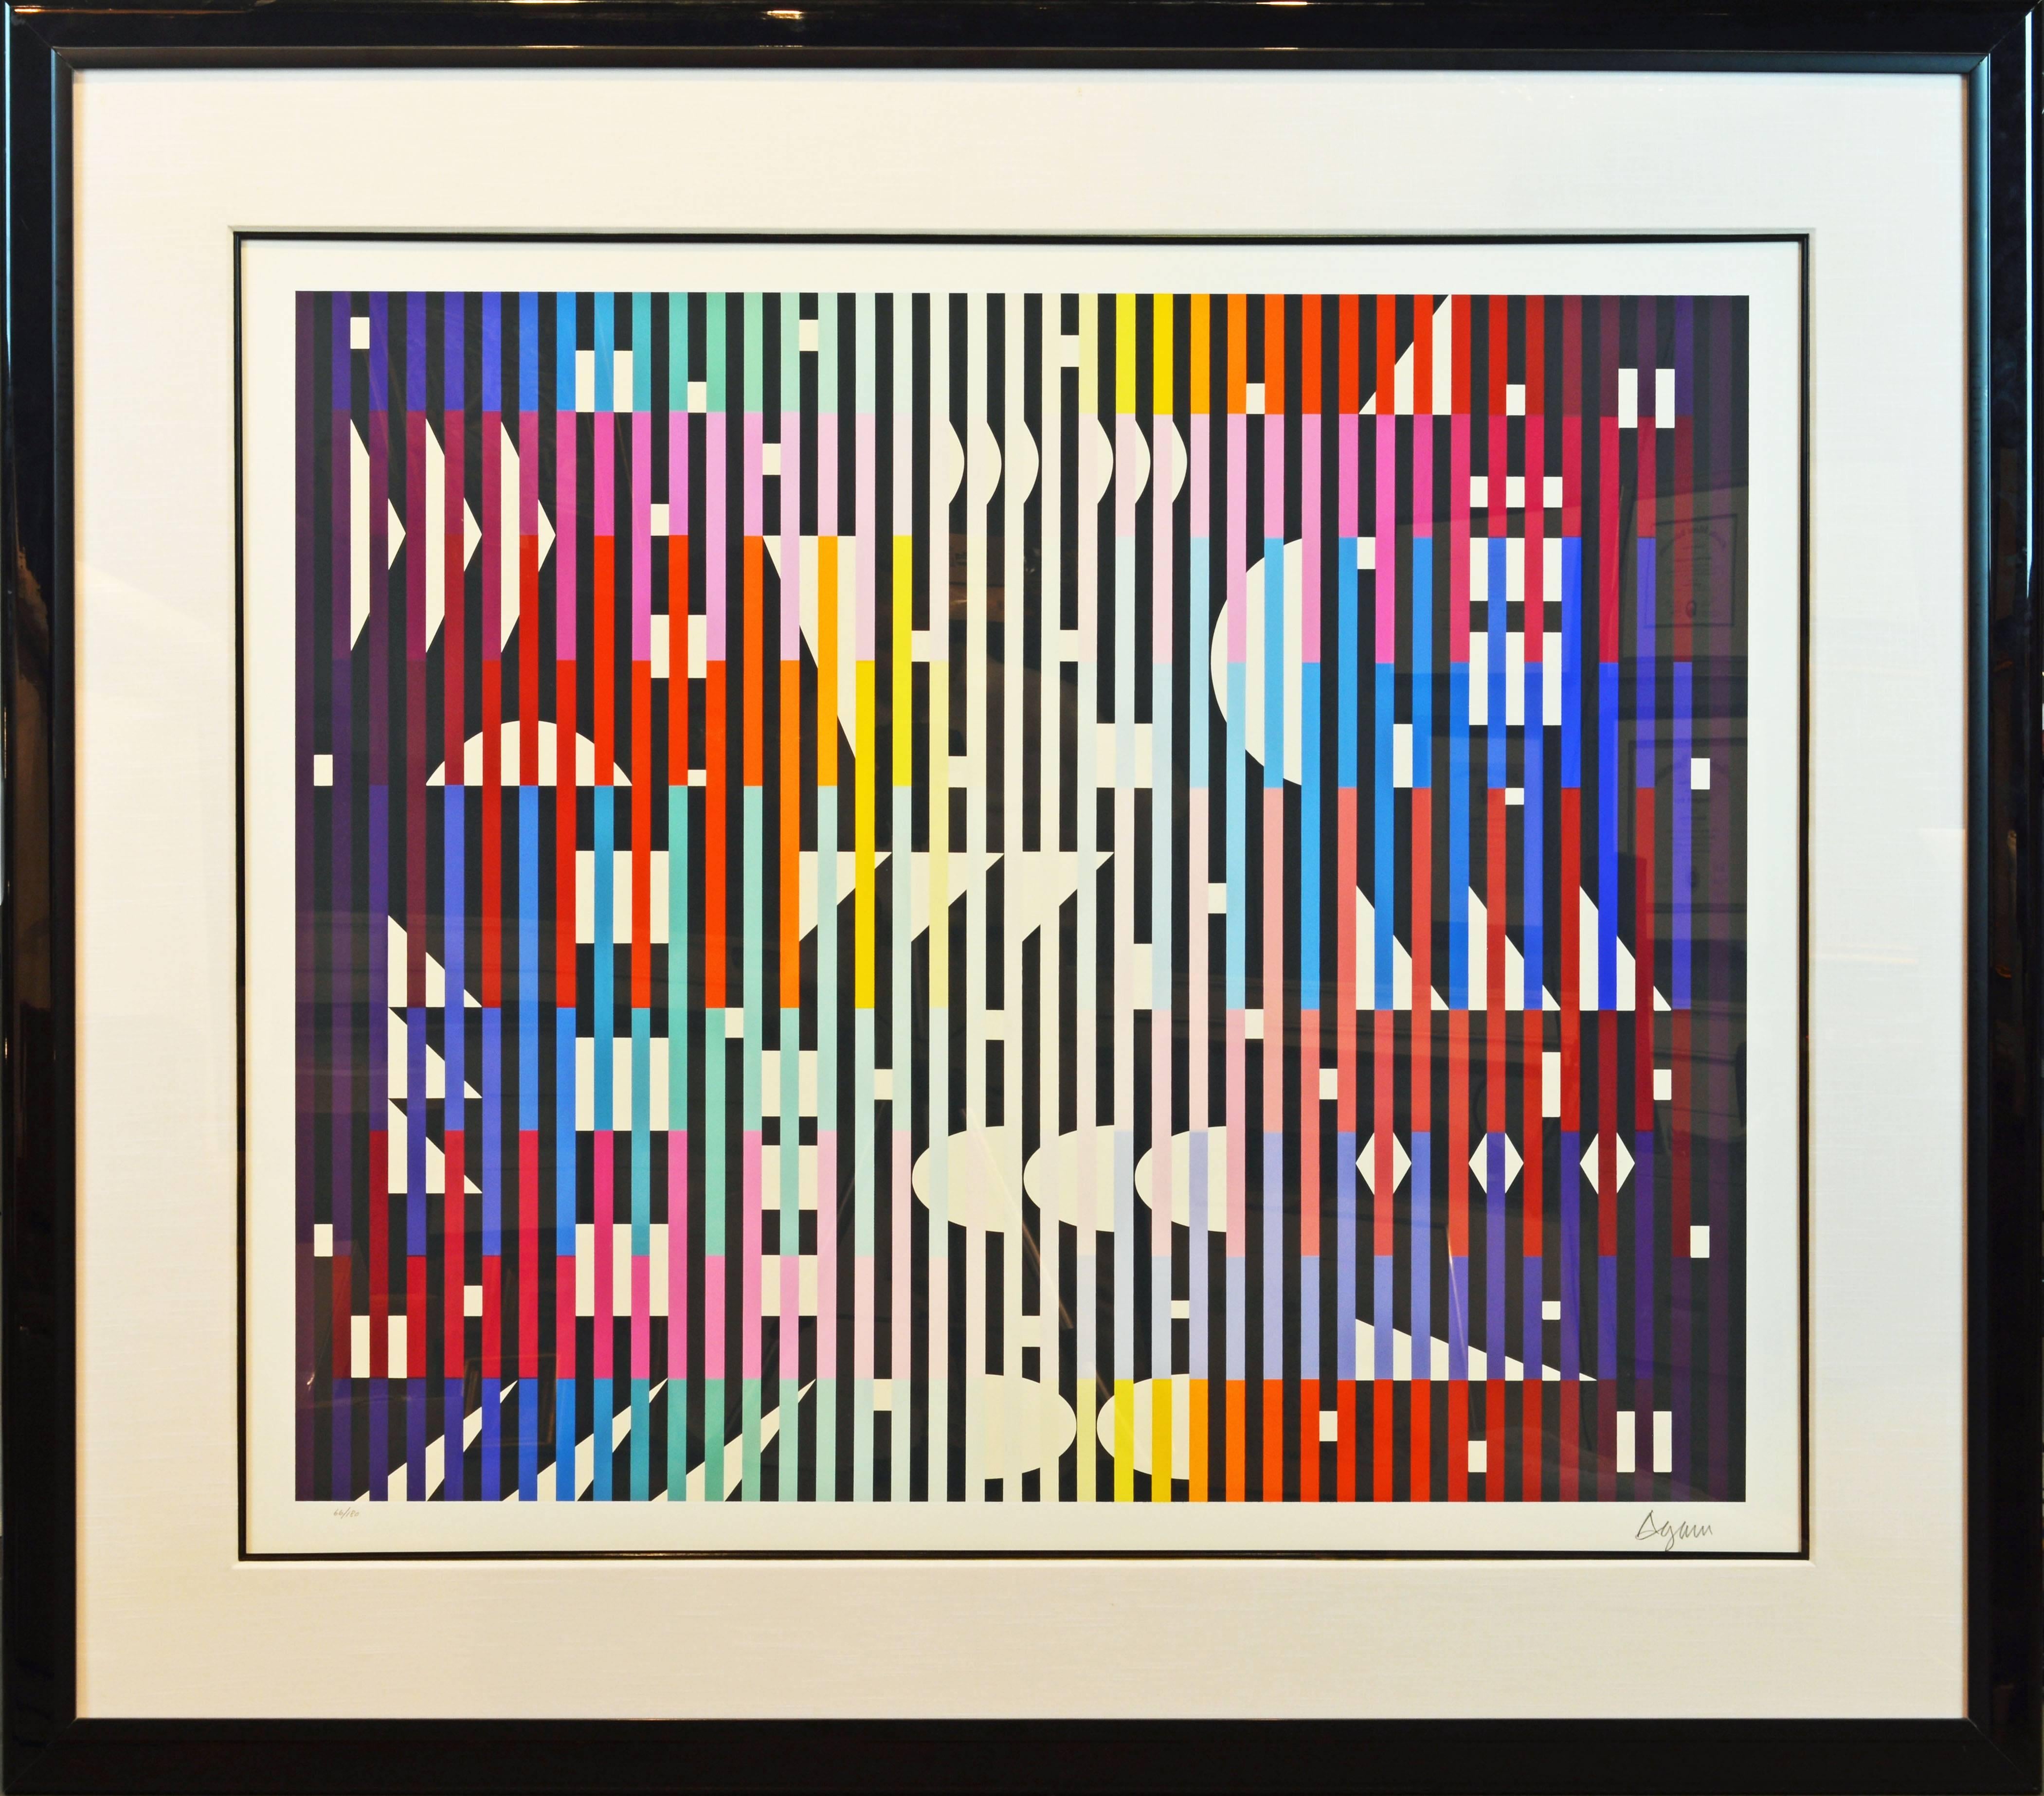 Well framed with wide matting this very large serigraph is signed and numbered in pencil by Yaacov Agam, Israeli, b. 1928, Rishon LeZion, Israel, based in Paris, France. Size including frame: 52 x 59 in. Image size: 35 in x 42 in.